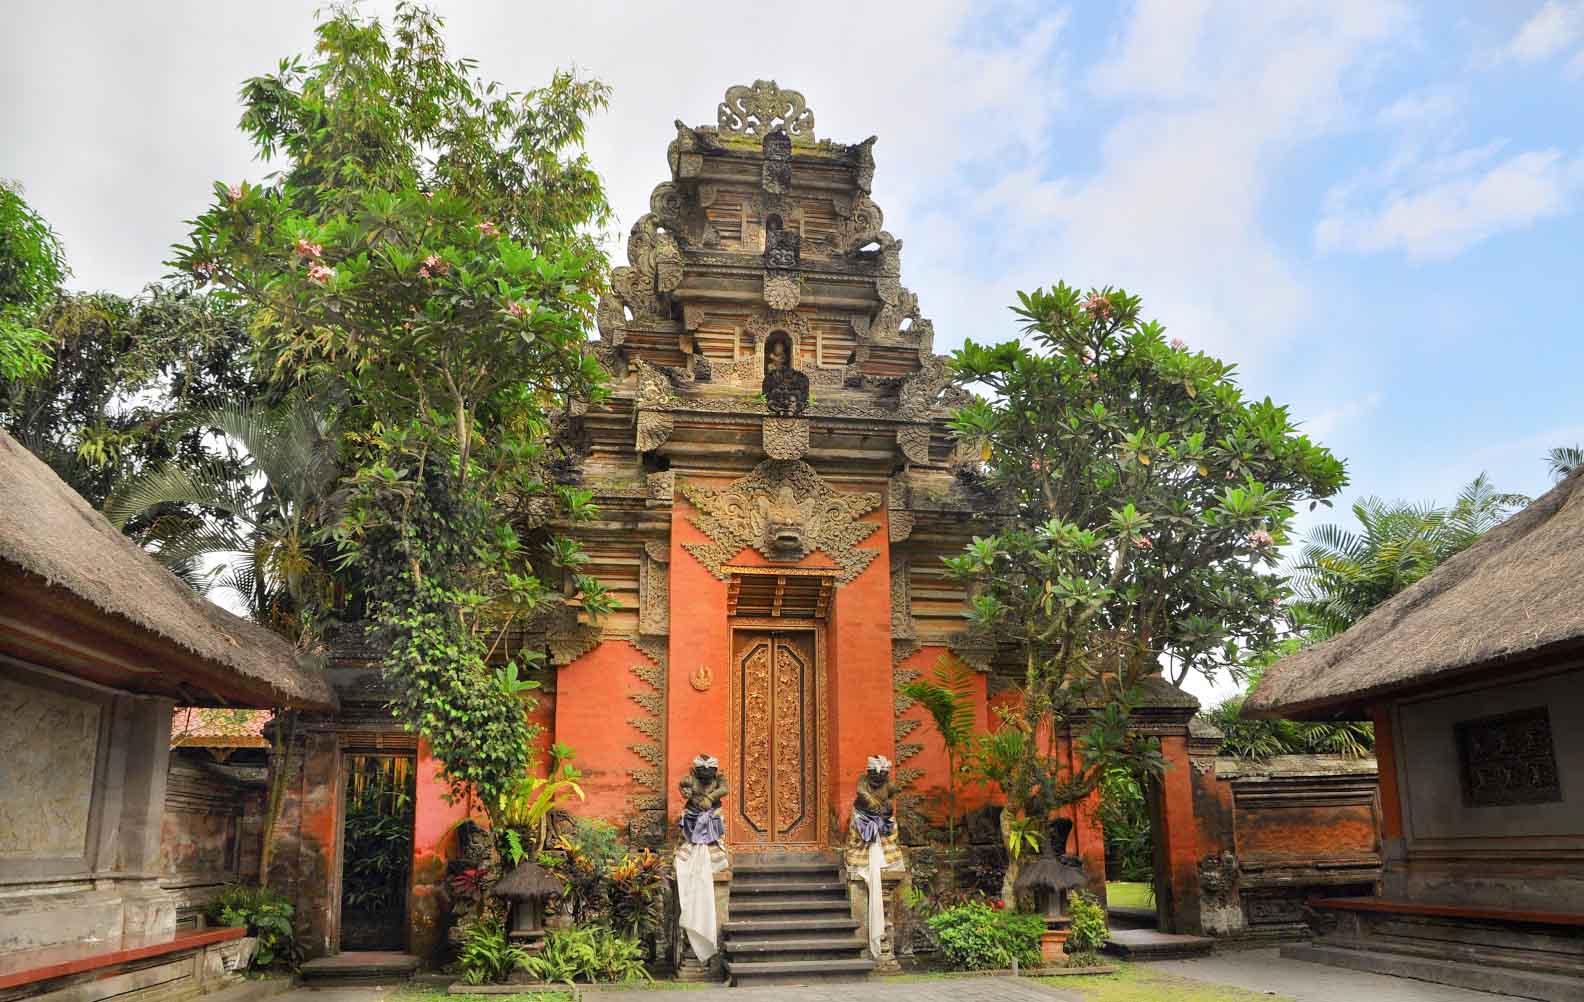 

More commonly known as the Ubud Royal Palace,
Puri Saren Agung of Sukawati was the residence of th